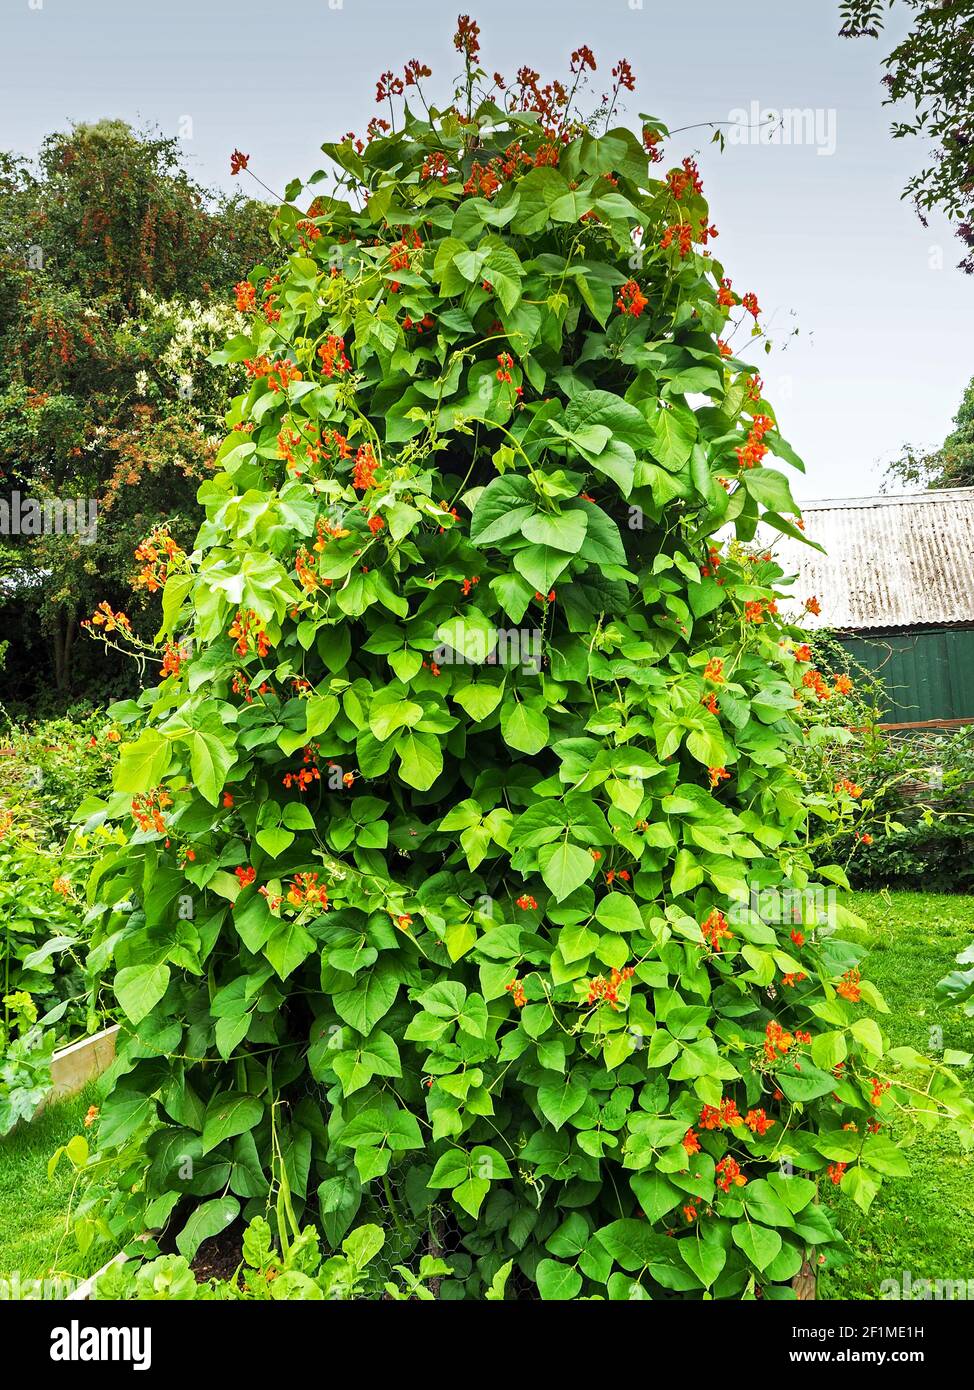 Runner bean plants with red flowers, variety Firestorm, growing on a wigwam support in a raised bed in a kitchen garden Stock Photo